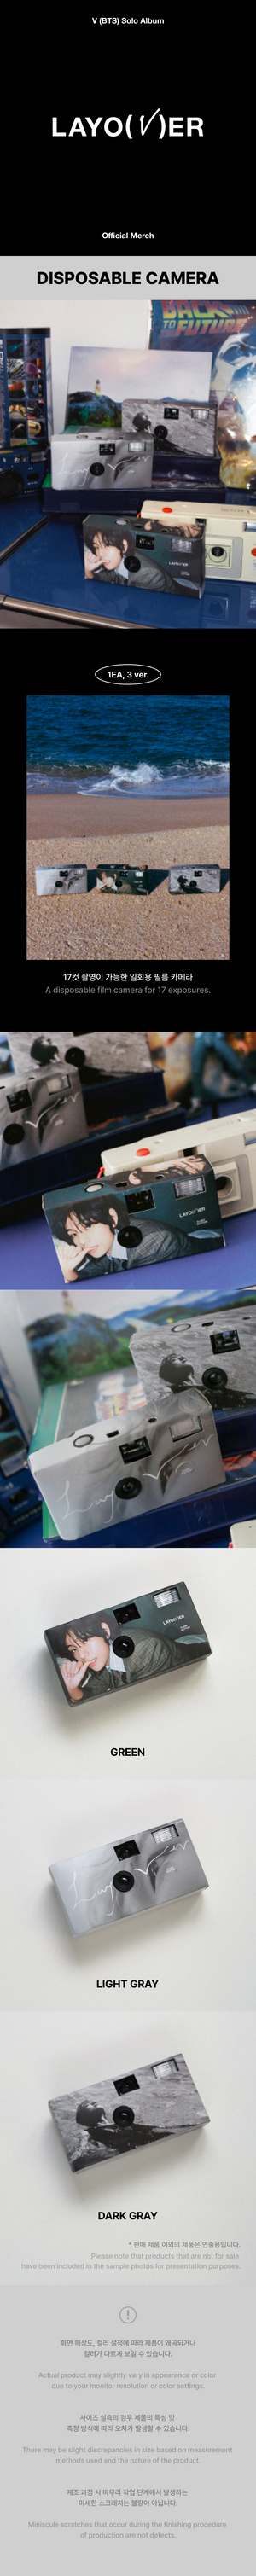 BTS V - LAYOVER 1ST SOLO ALBUM OFFICIAL MD - COKODIVE